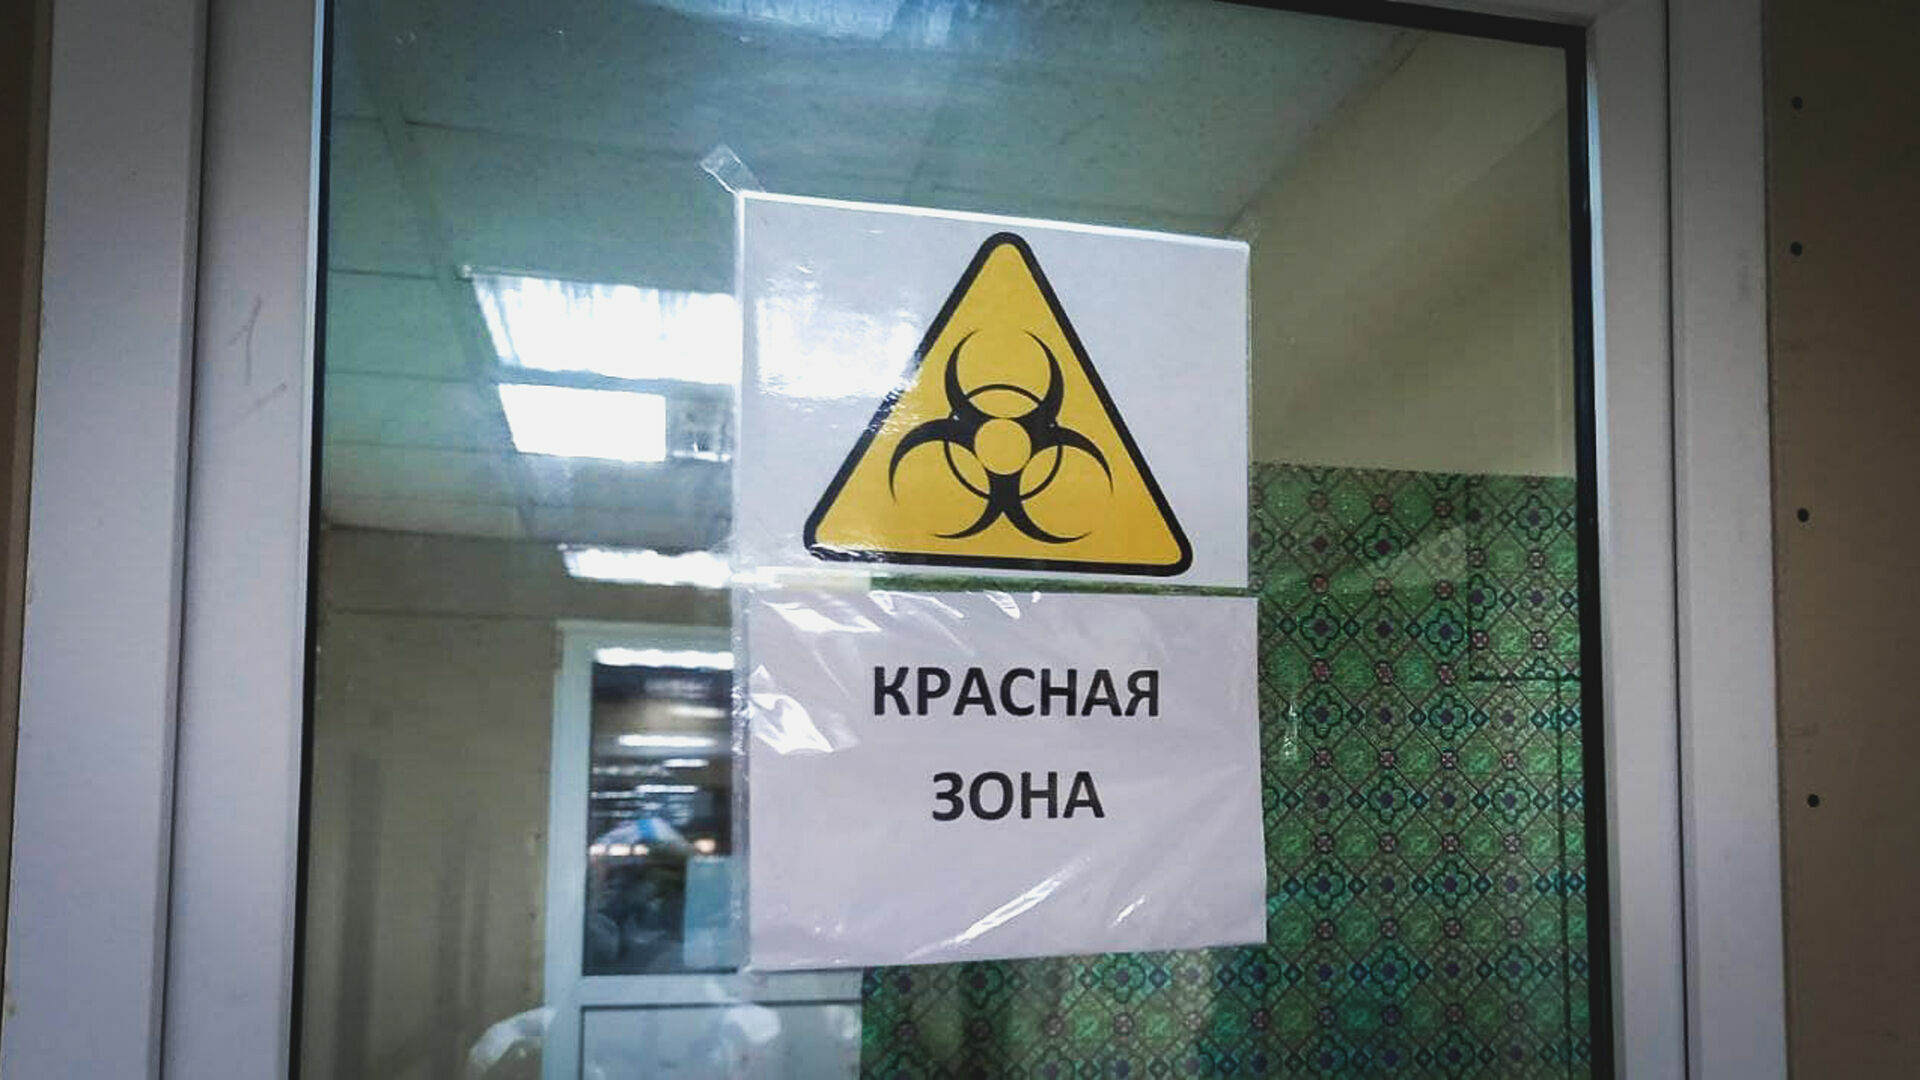 Sad results: for 2 years of the pandemic, life expectancy in Russia fell by 3.6 years